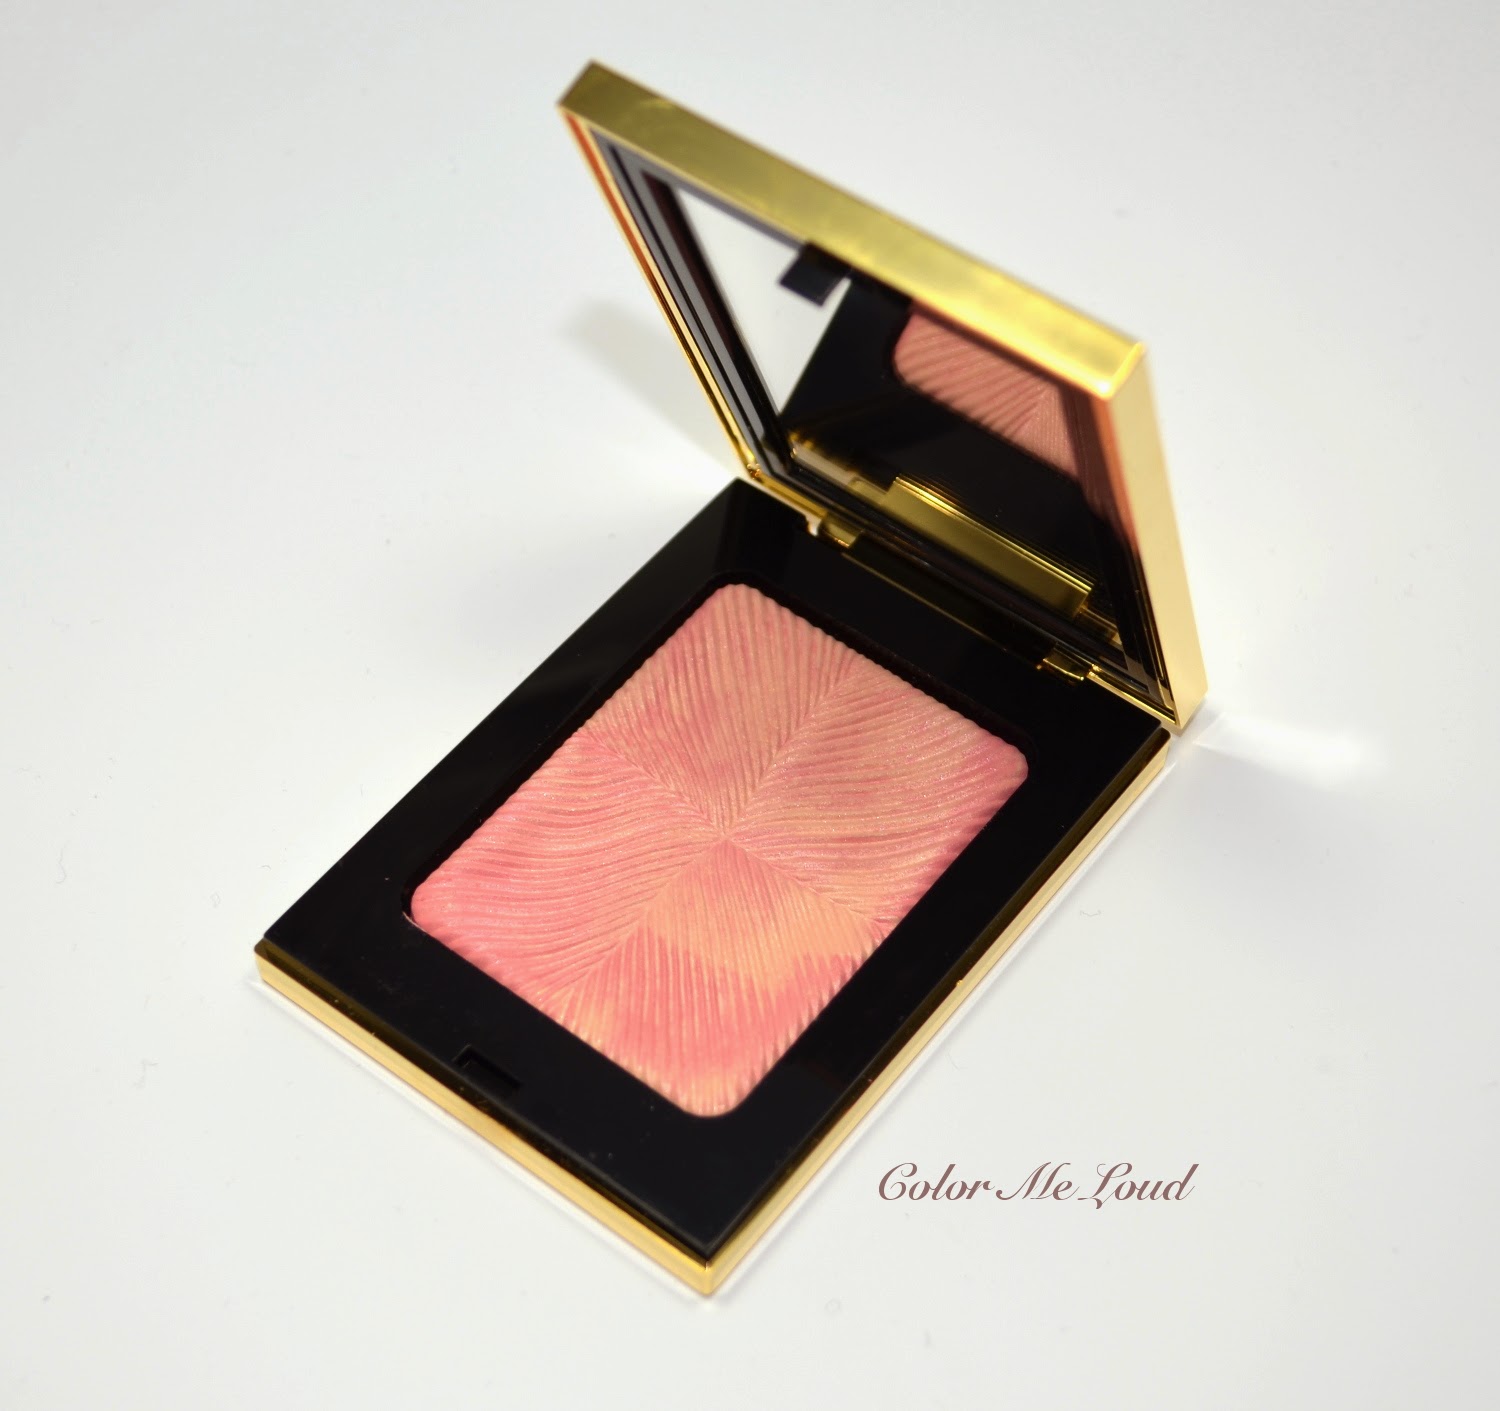 Yves Saint Laurent Flower Crush Palette Rosy Blush Blush Duo from Spring 2014 Flower Crush Collection, Swatches & Comparison